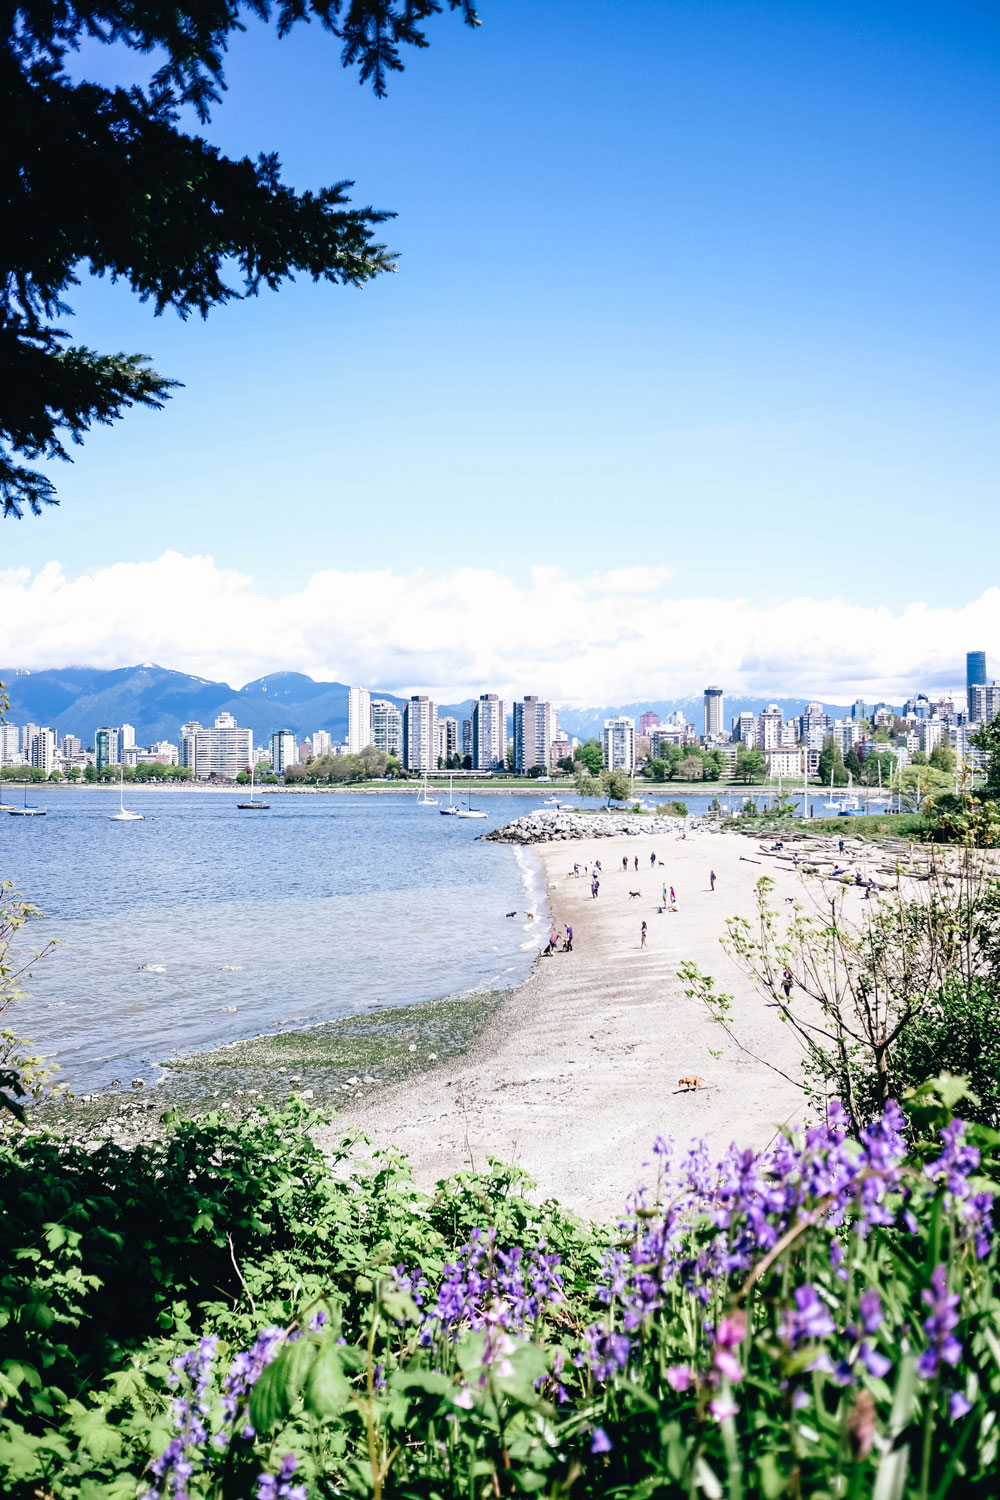 photography tips for beginners, best views in vancouver, what to see in vancouver, what to do in vancouver, best coffee shops in vancouver, vancouver travel guide by To Vogue or Bust